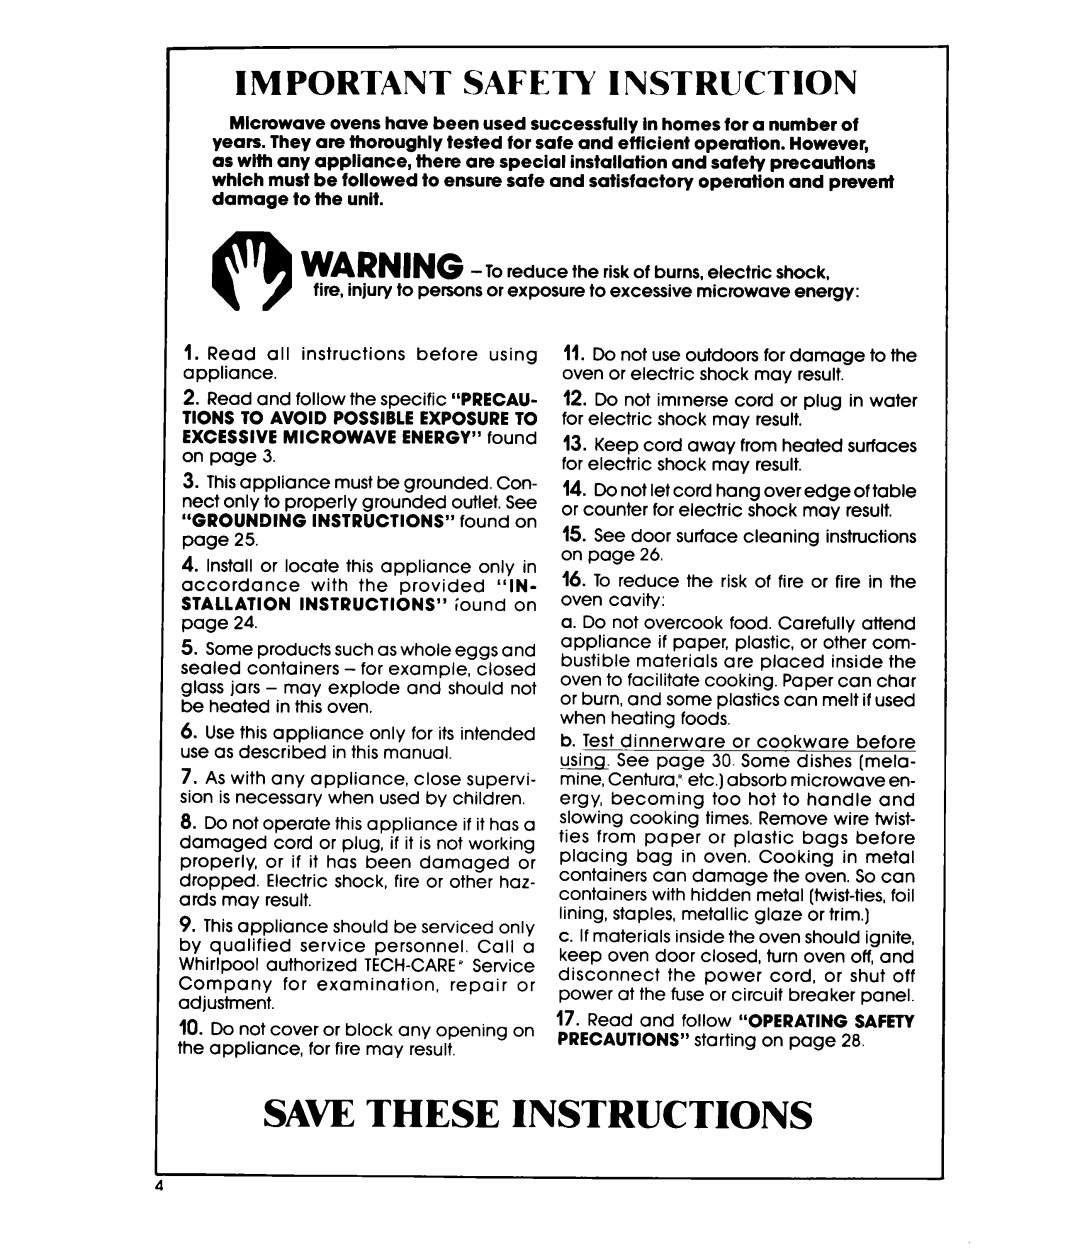 Whirlpool MW36OOXS manual Save These Instructions, Important Safety Instruction 